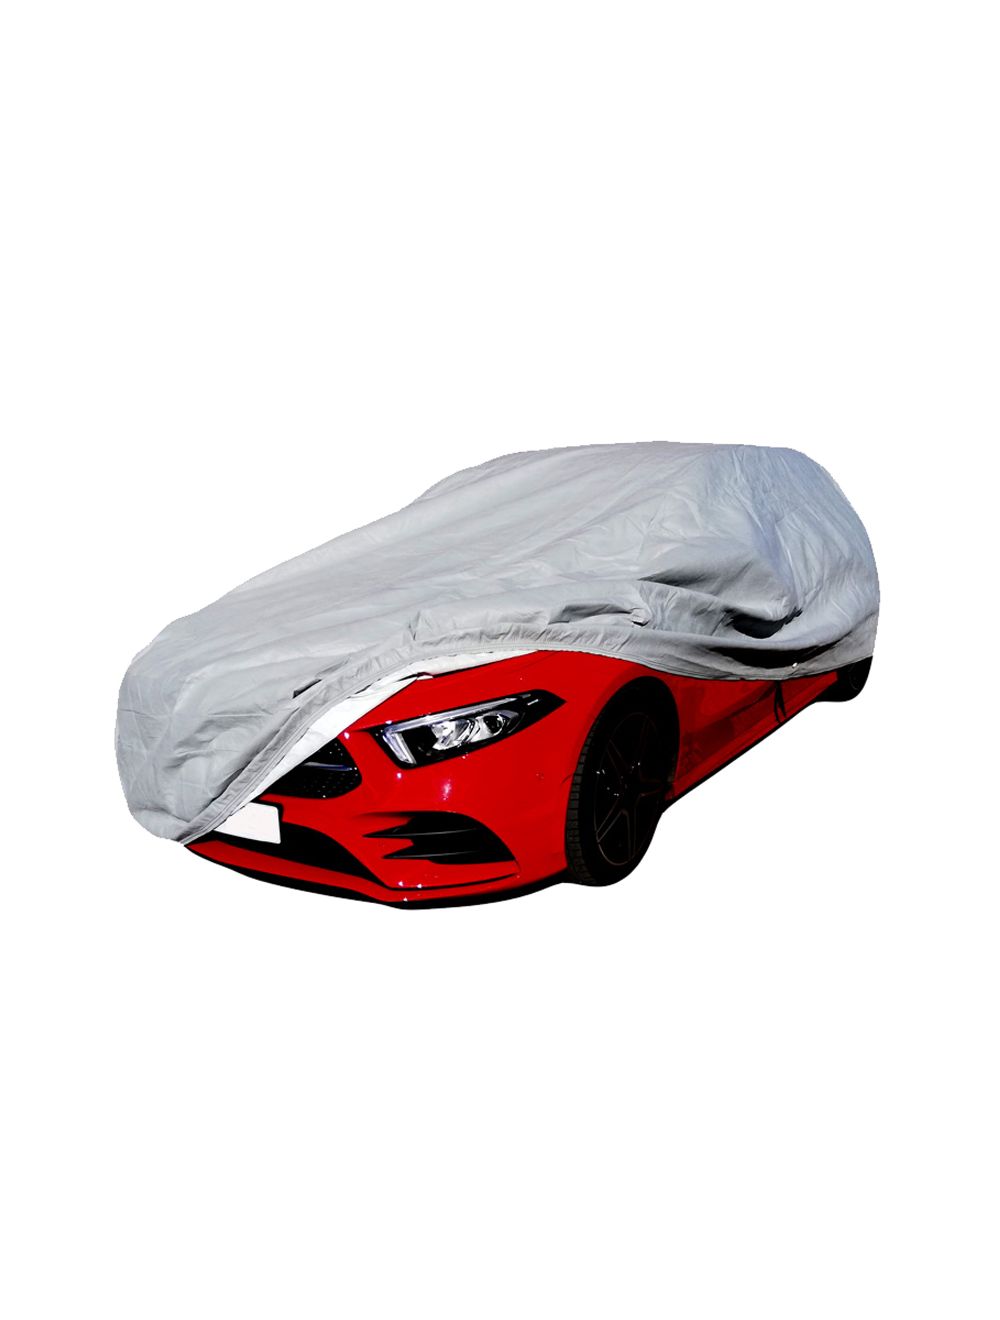 Car Cover for Mercedes GLK Class All Weather Breathable SUV Cover